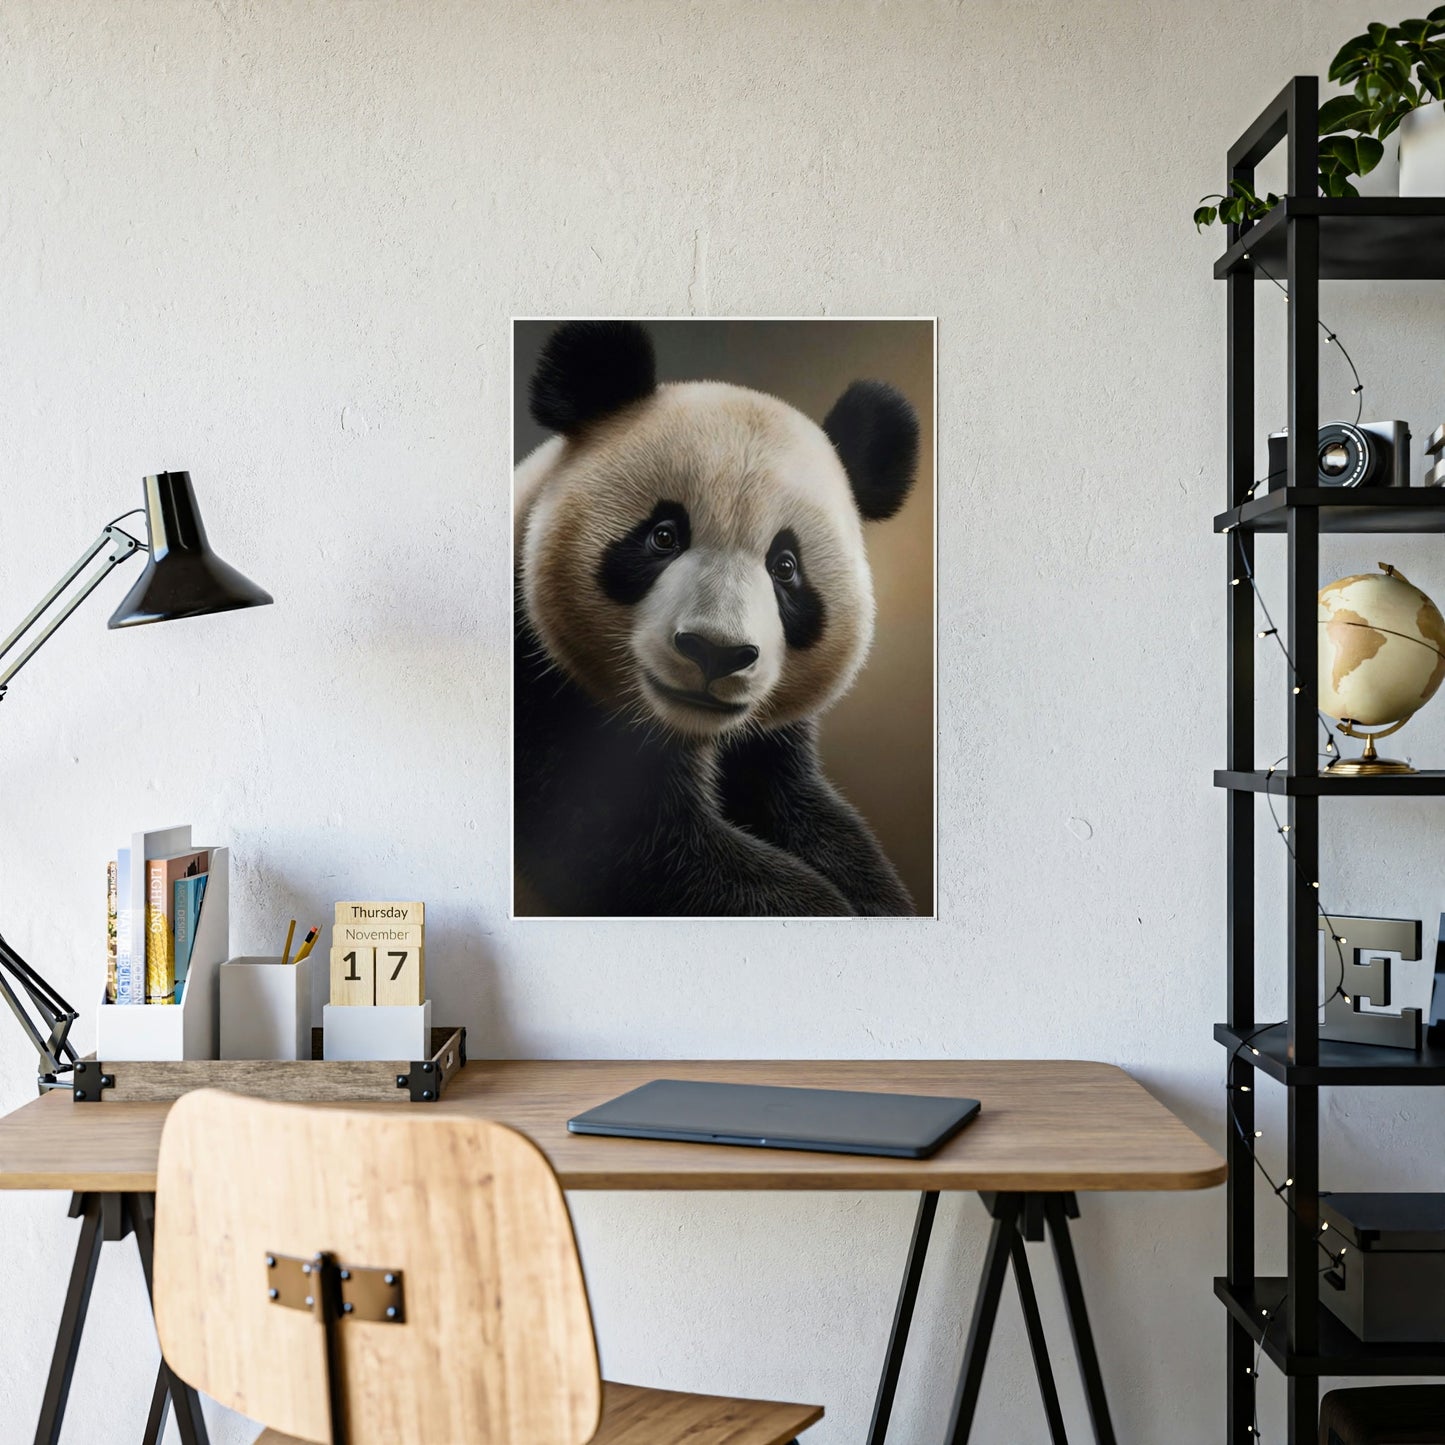 Panda at Rest: A Serene Portrait of Gentle Giant on Canvas